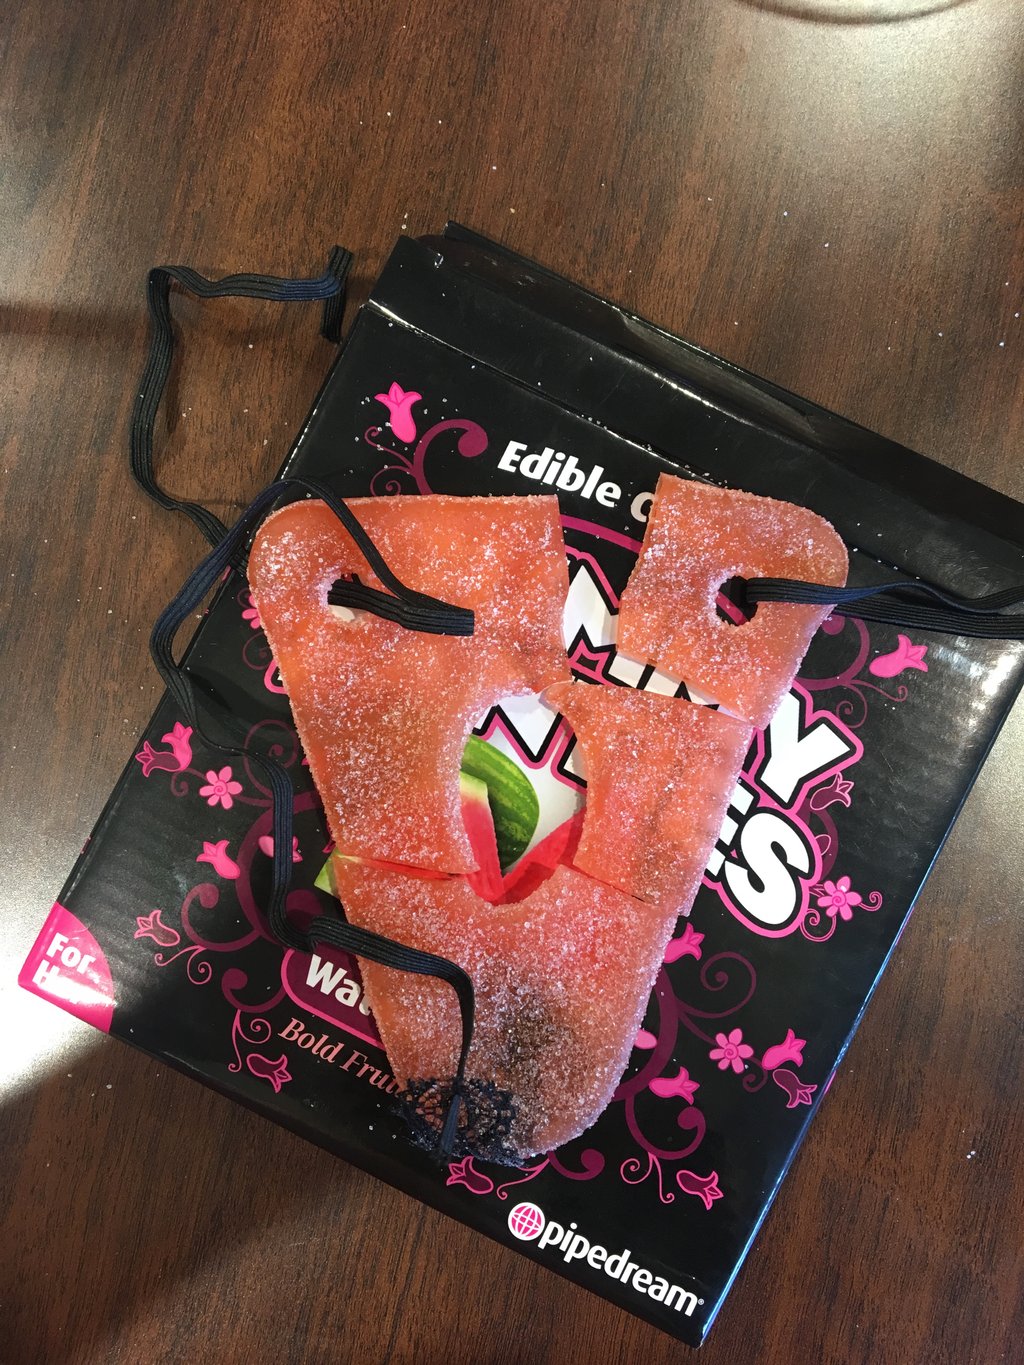 CANDYPANTS BOXED FEMALE Edible Underwear Comes in Different